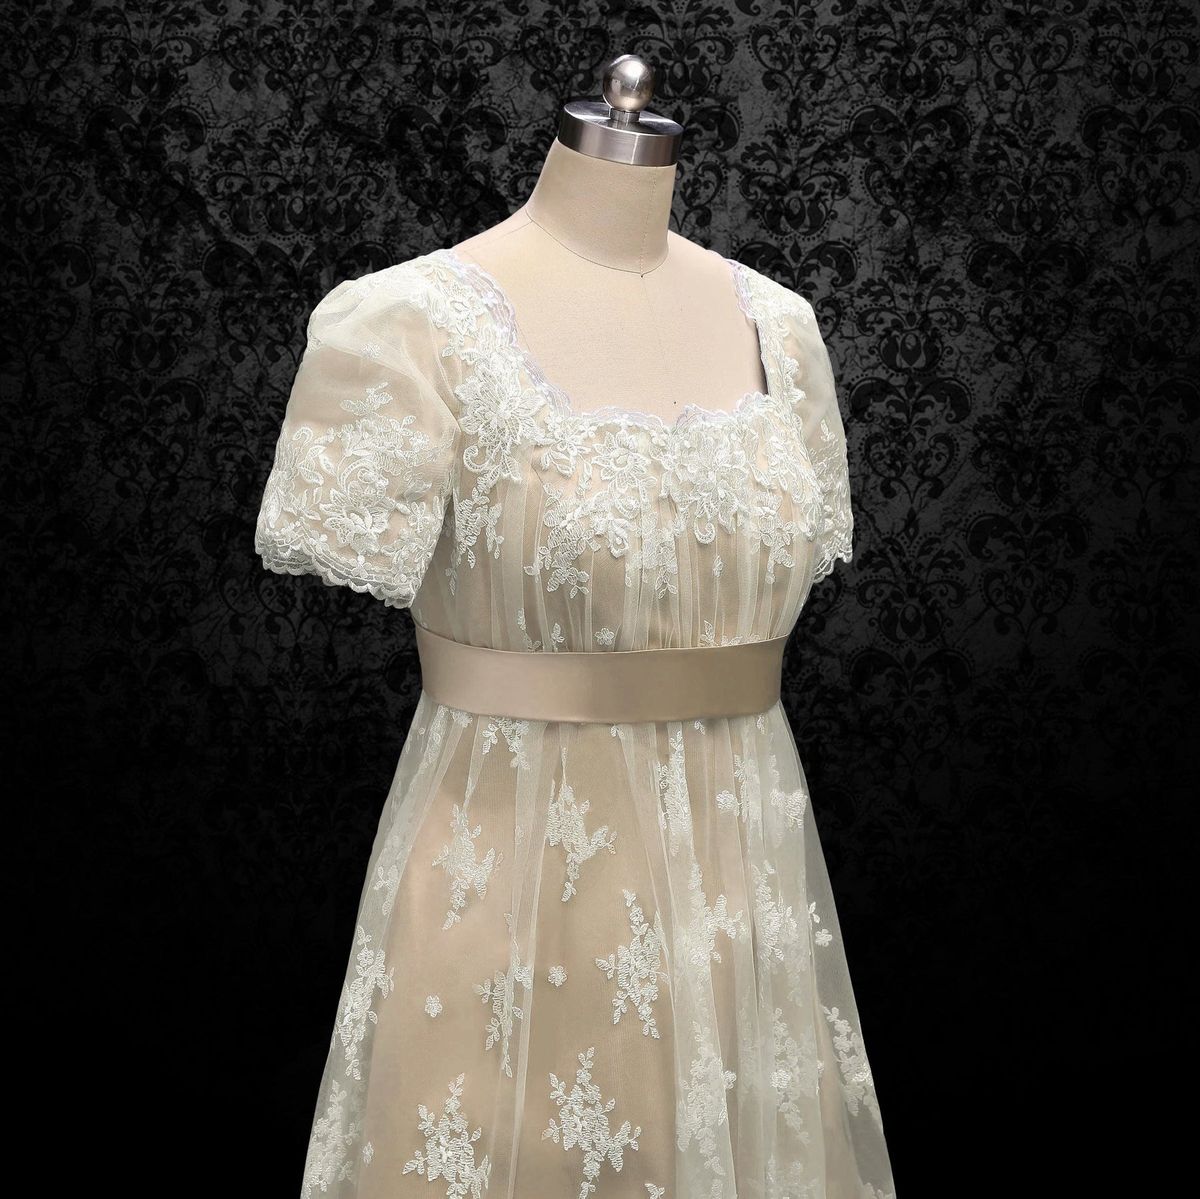 Wonderland By Lilian Plus Size 18 Prom Lace Nude A-line Dress on Queenly